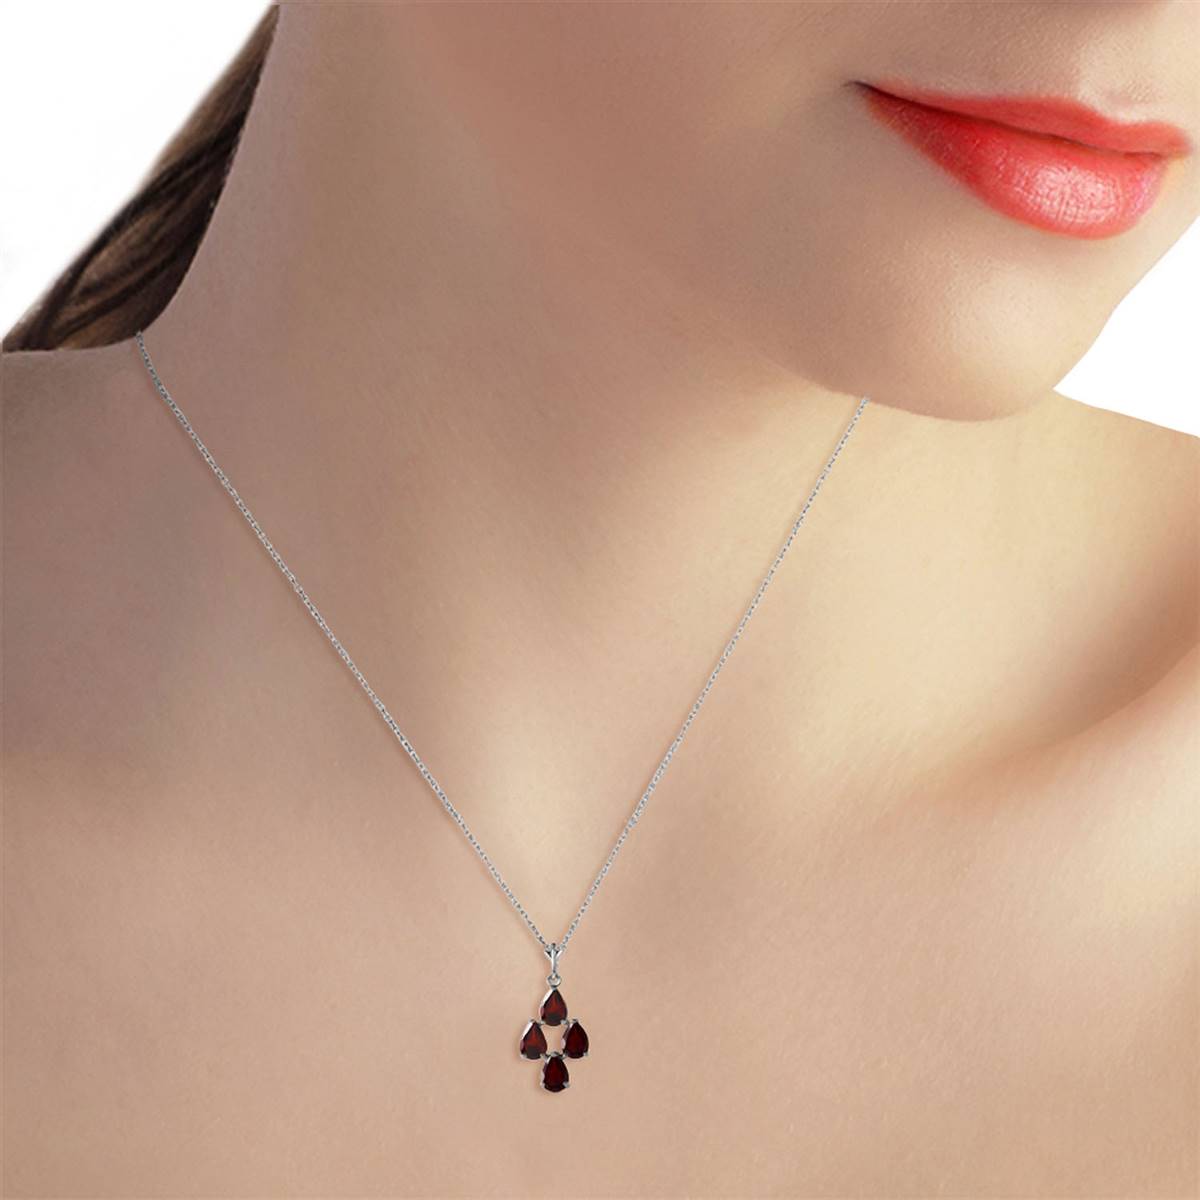 1.5 Carat 14K Solid White Gold Night Out Garnet Necklace